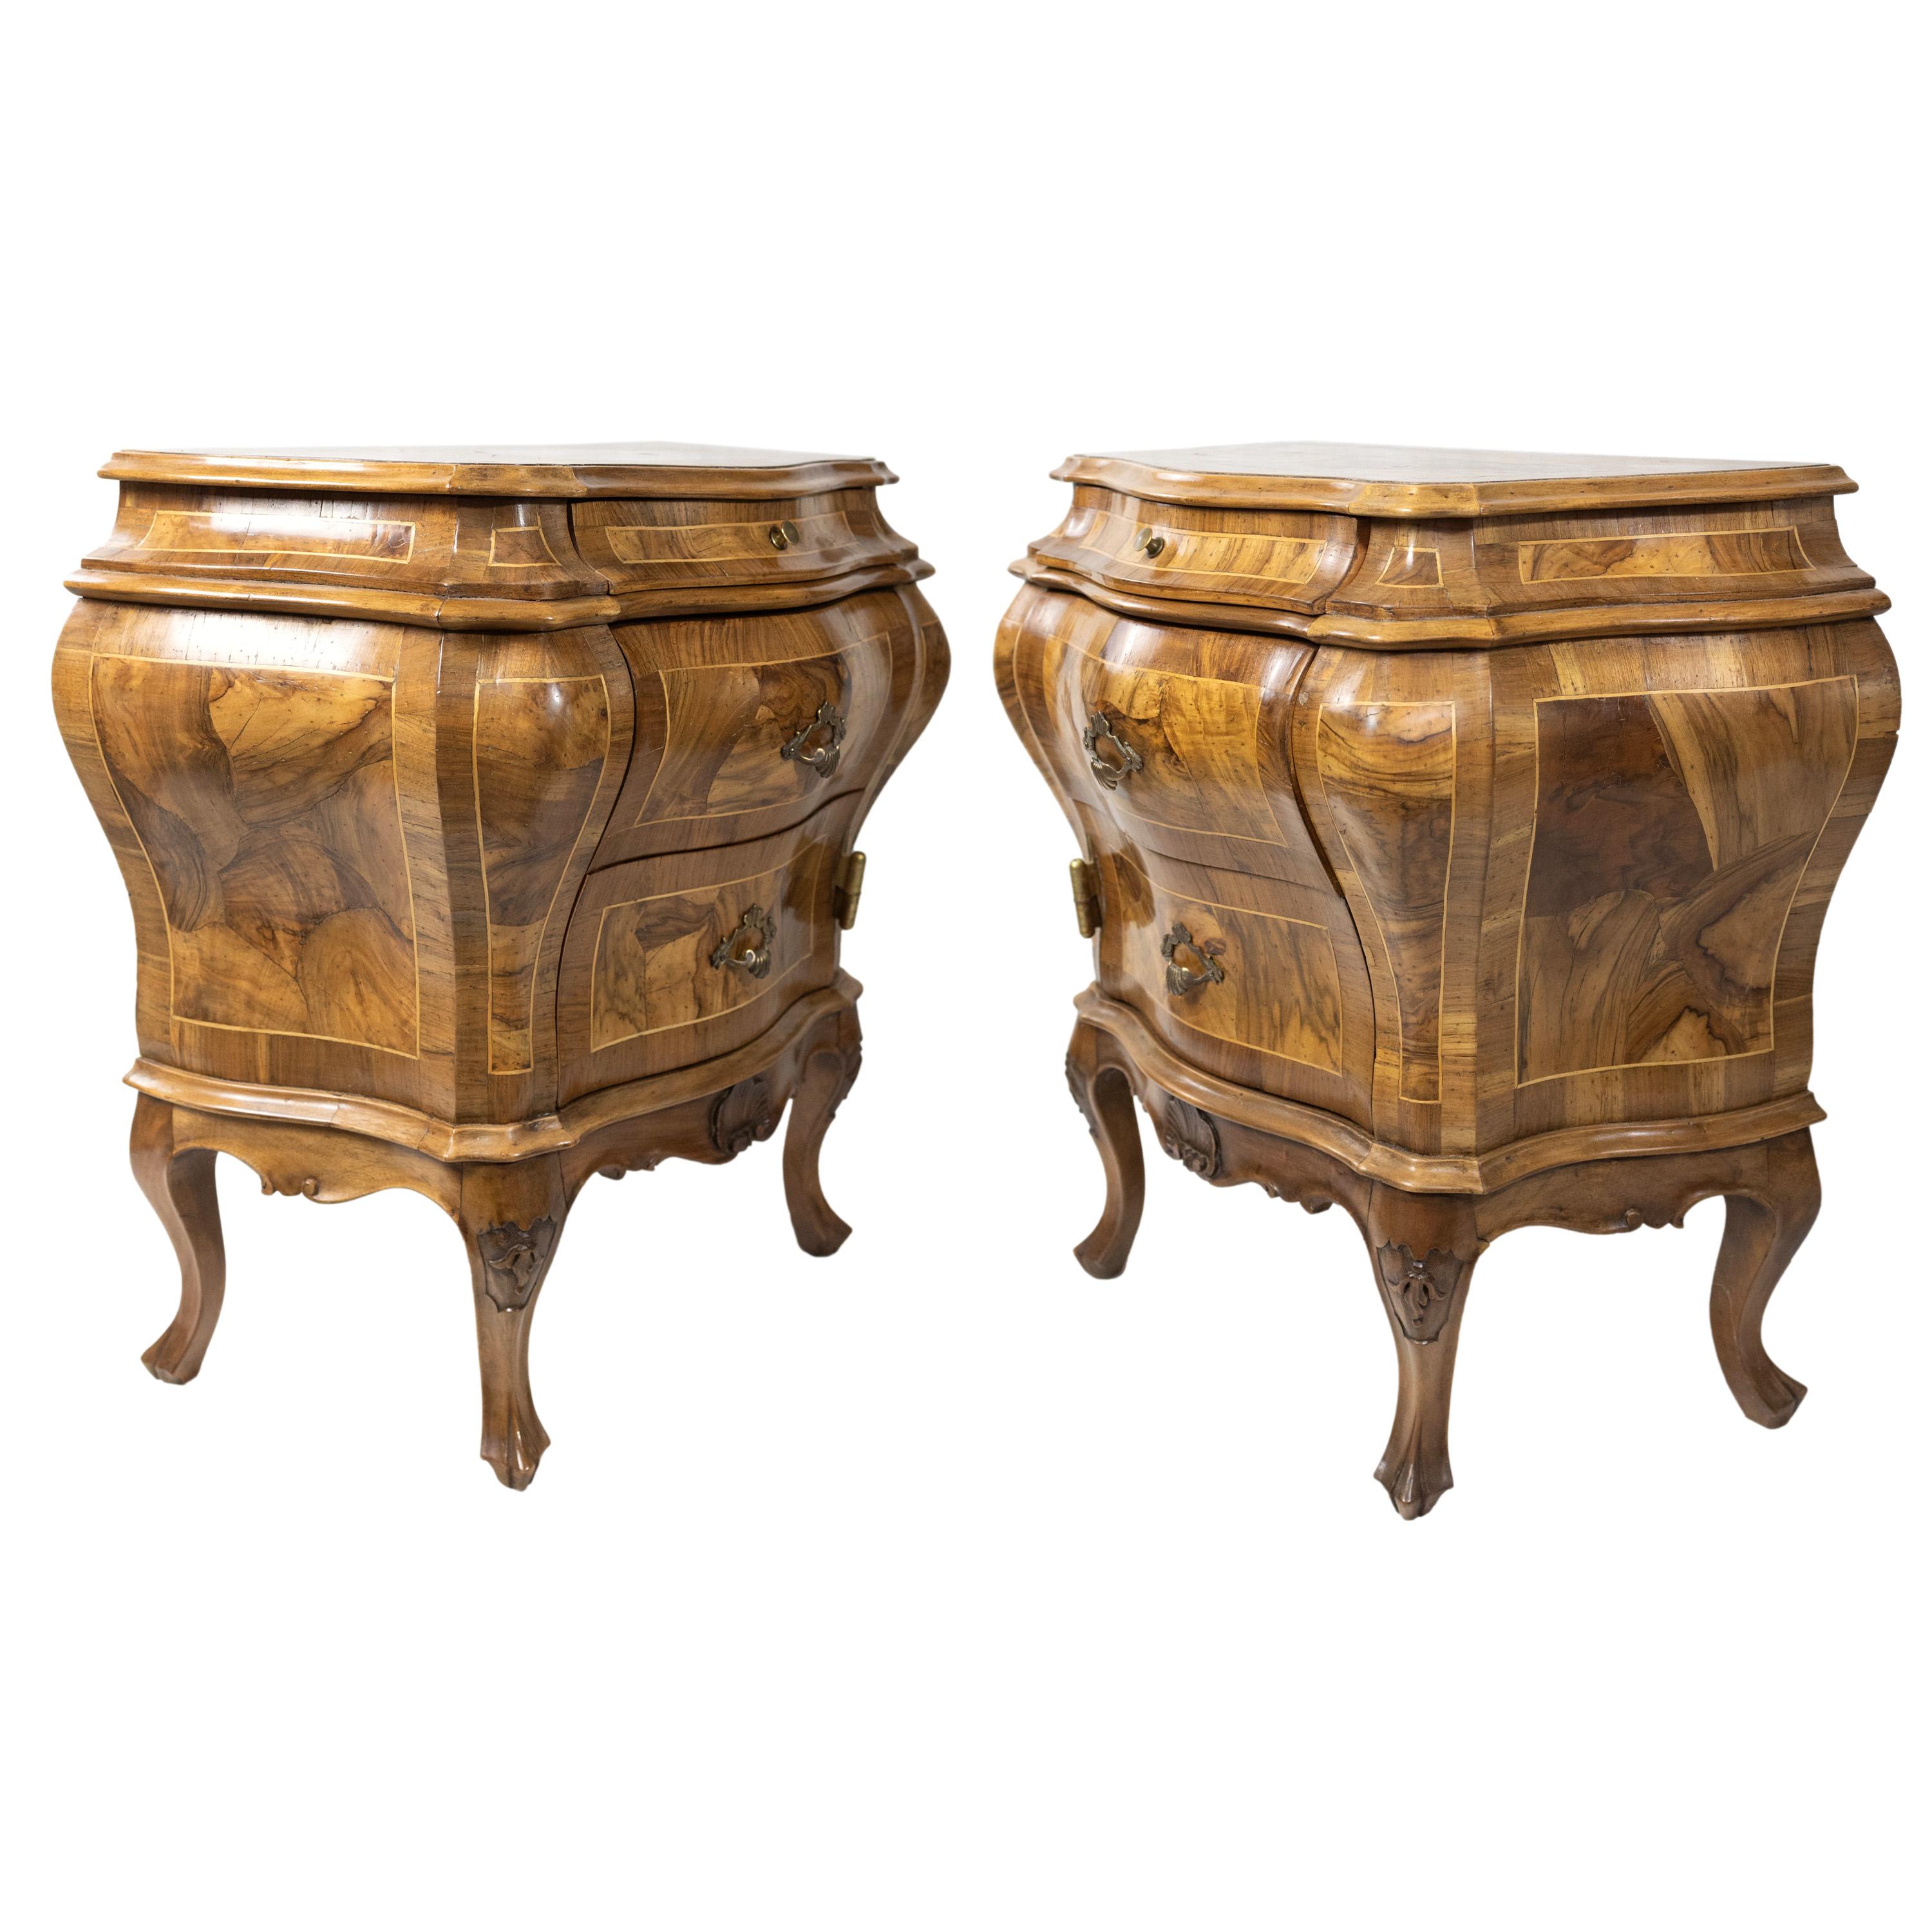 Belle Époque Pair of Olive Wood Bombé Commodes/Side Cabinets, Italian, ca. 1880